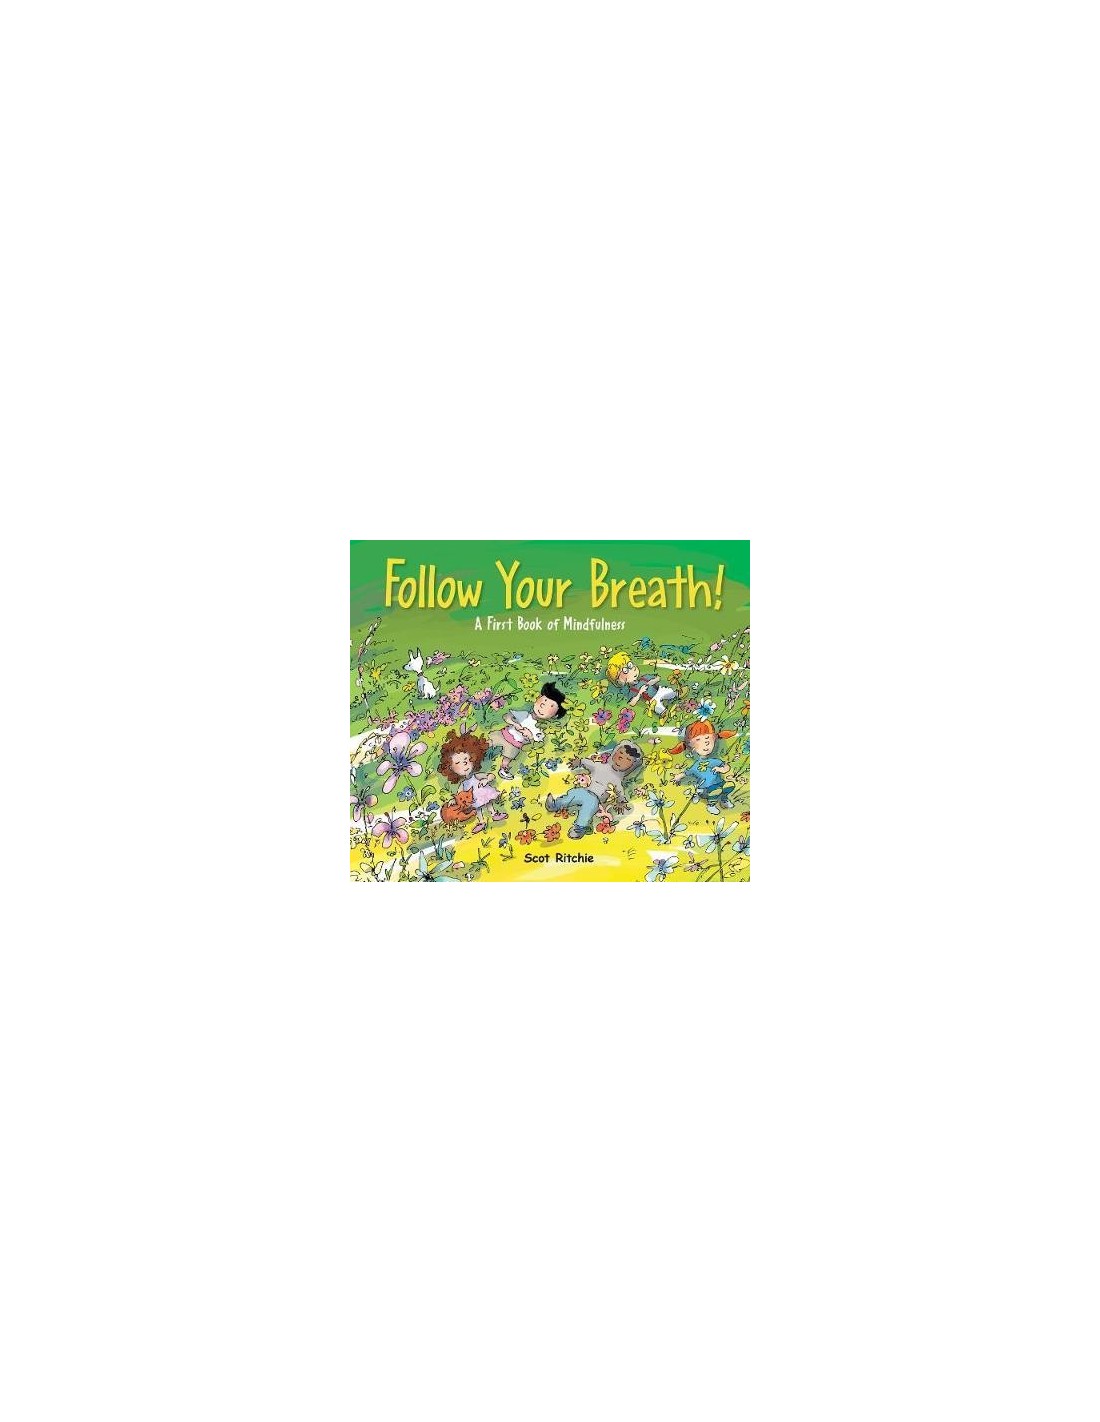 Folow Your Breath! : A First Book of Mindfulness